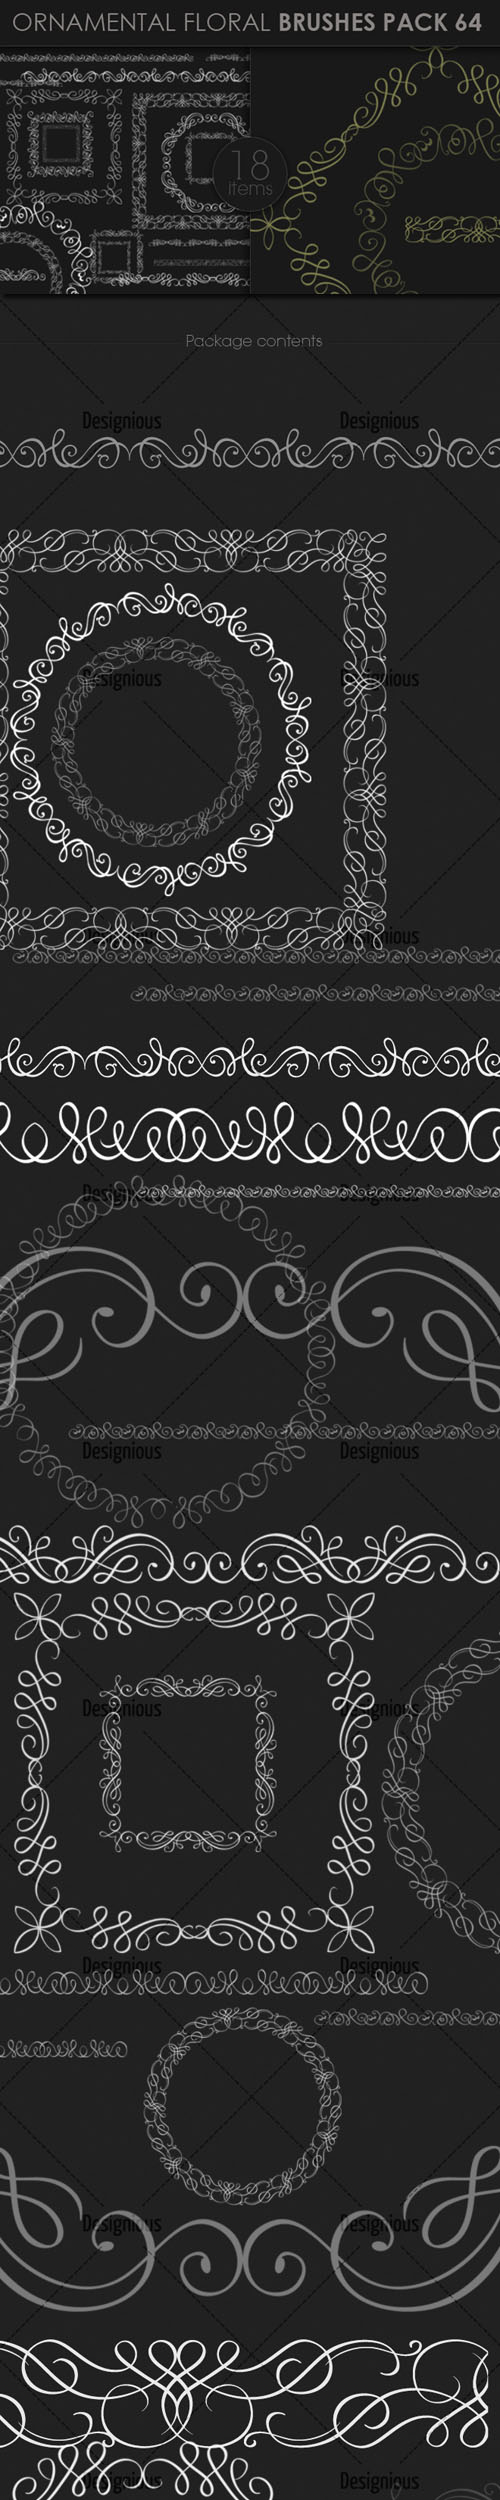 Ornamental Floral Photoshop Brushes Pack 64